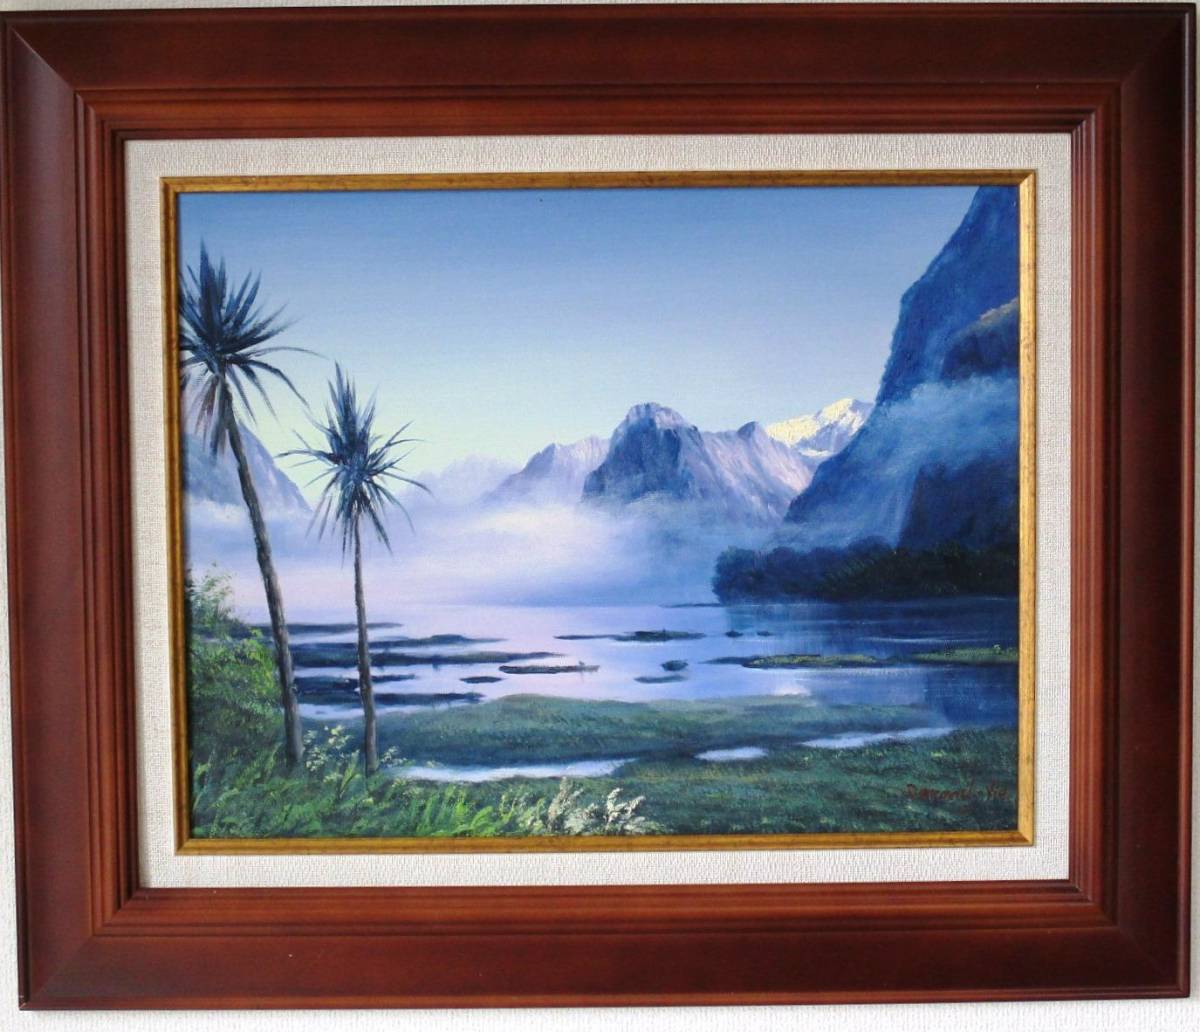  picture oil painting landscape painting New Zealand *fiyorudo Land national park illusion ... scenery Mill Ford * sound F6 WG284B